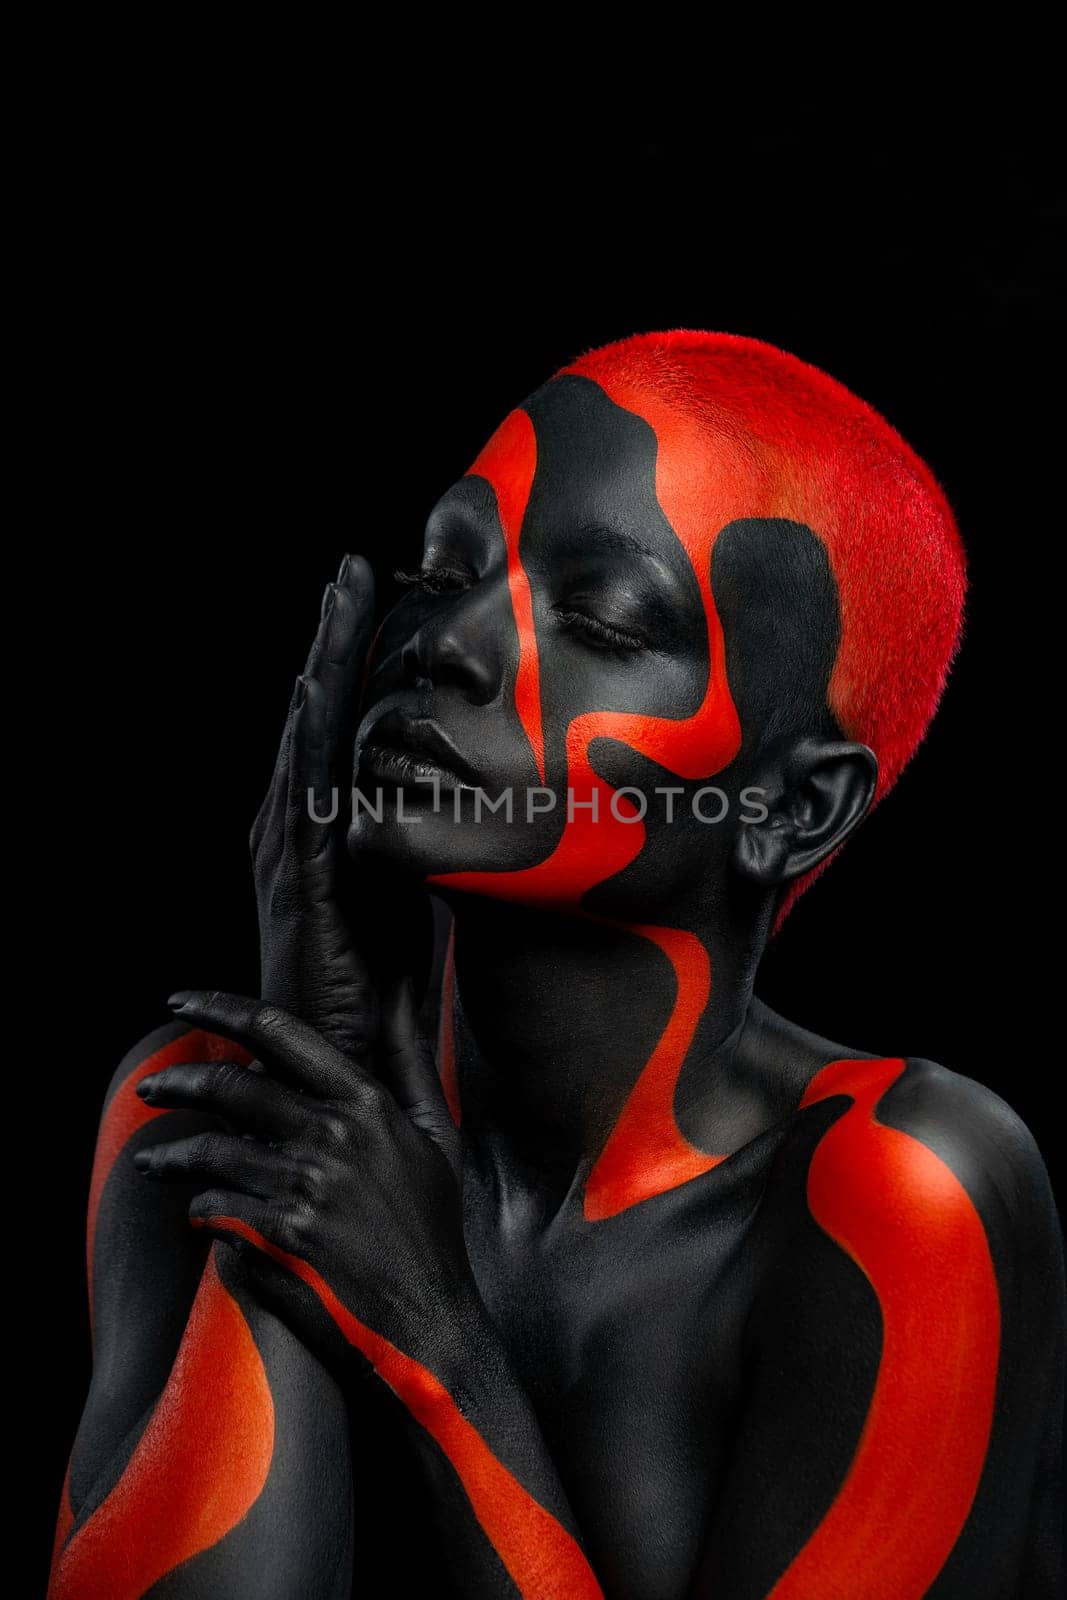 The Art Face. How To Make A Mixtape Cover Design - Download High Resolution Picture with Black and yellow body paint on african woman for your Music Song. Create Album Template with Creative Image